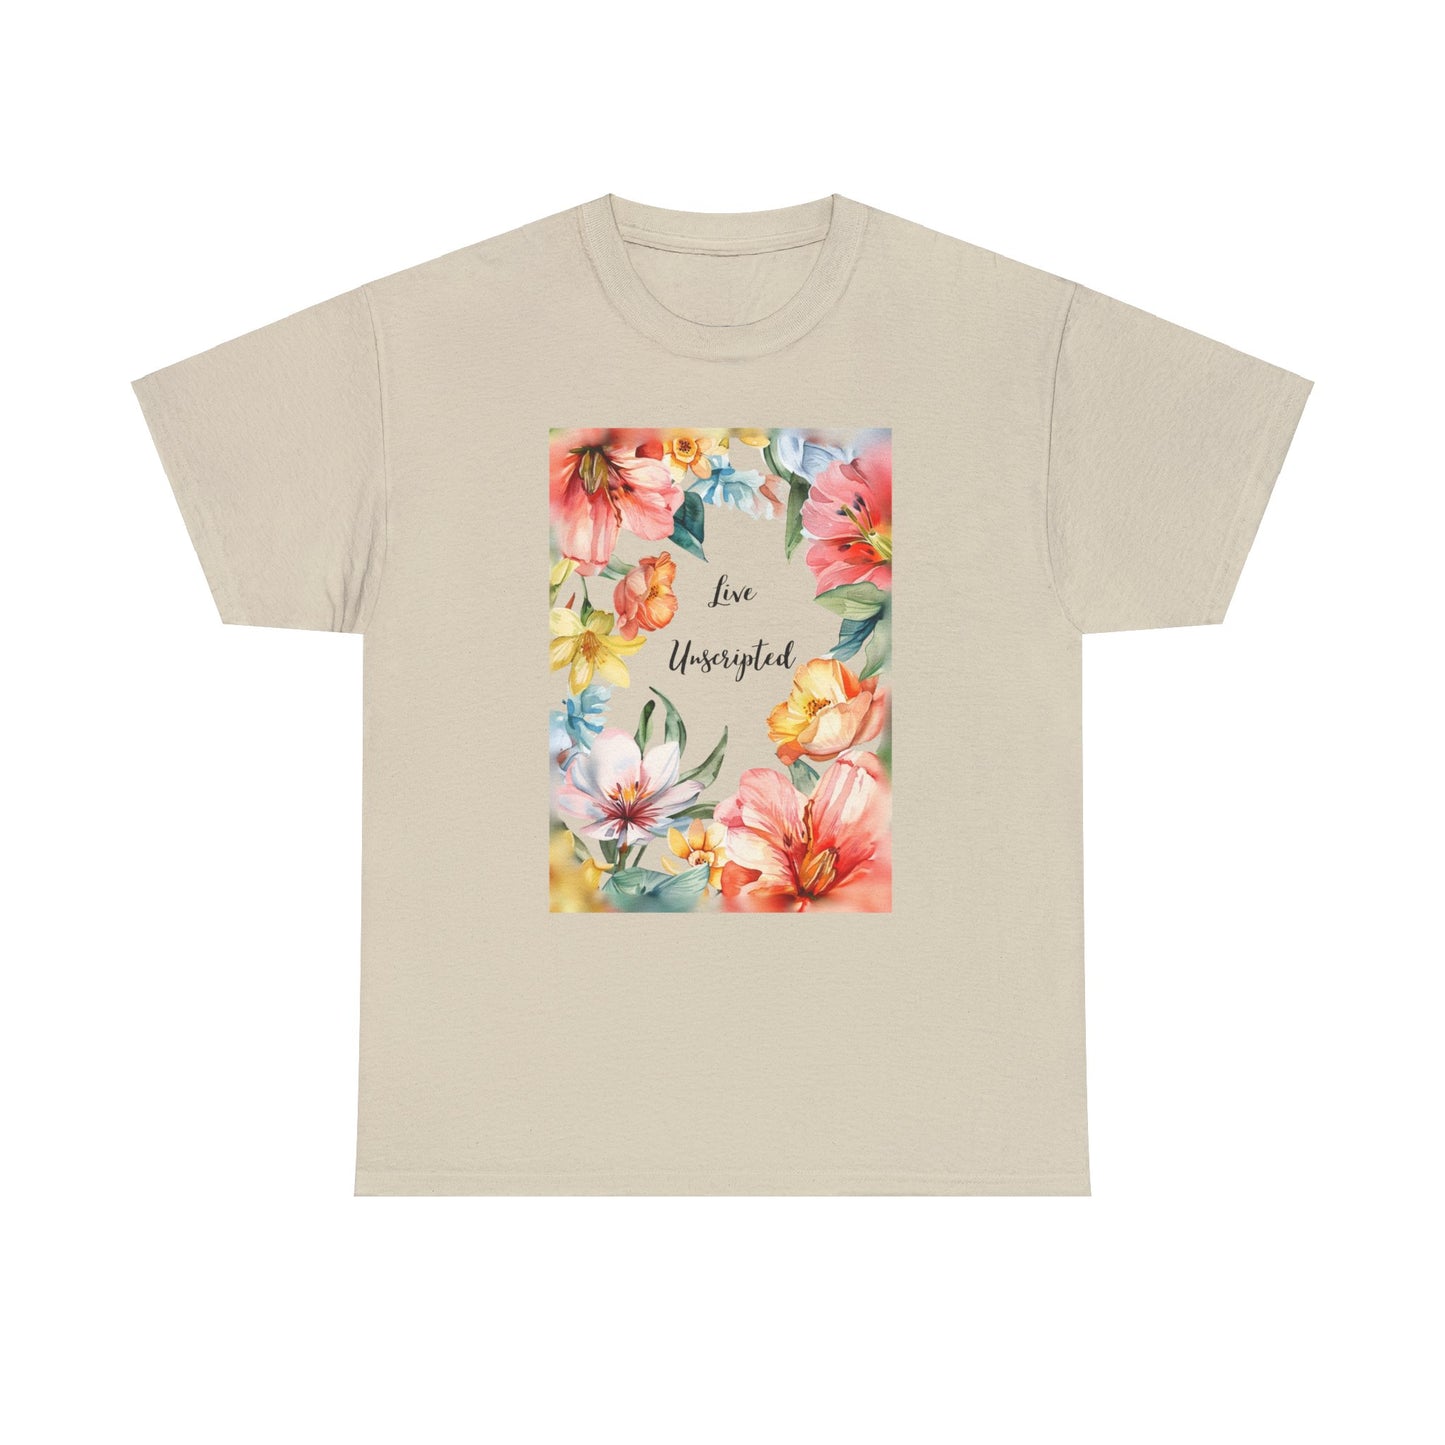 Flowery Art Inspirational Cottagecore T-Shirt,  Fairycode floral painting, Live unscripted tag line, life quotes